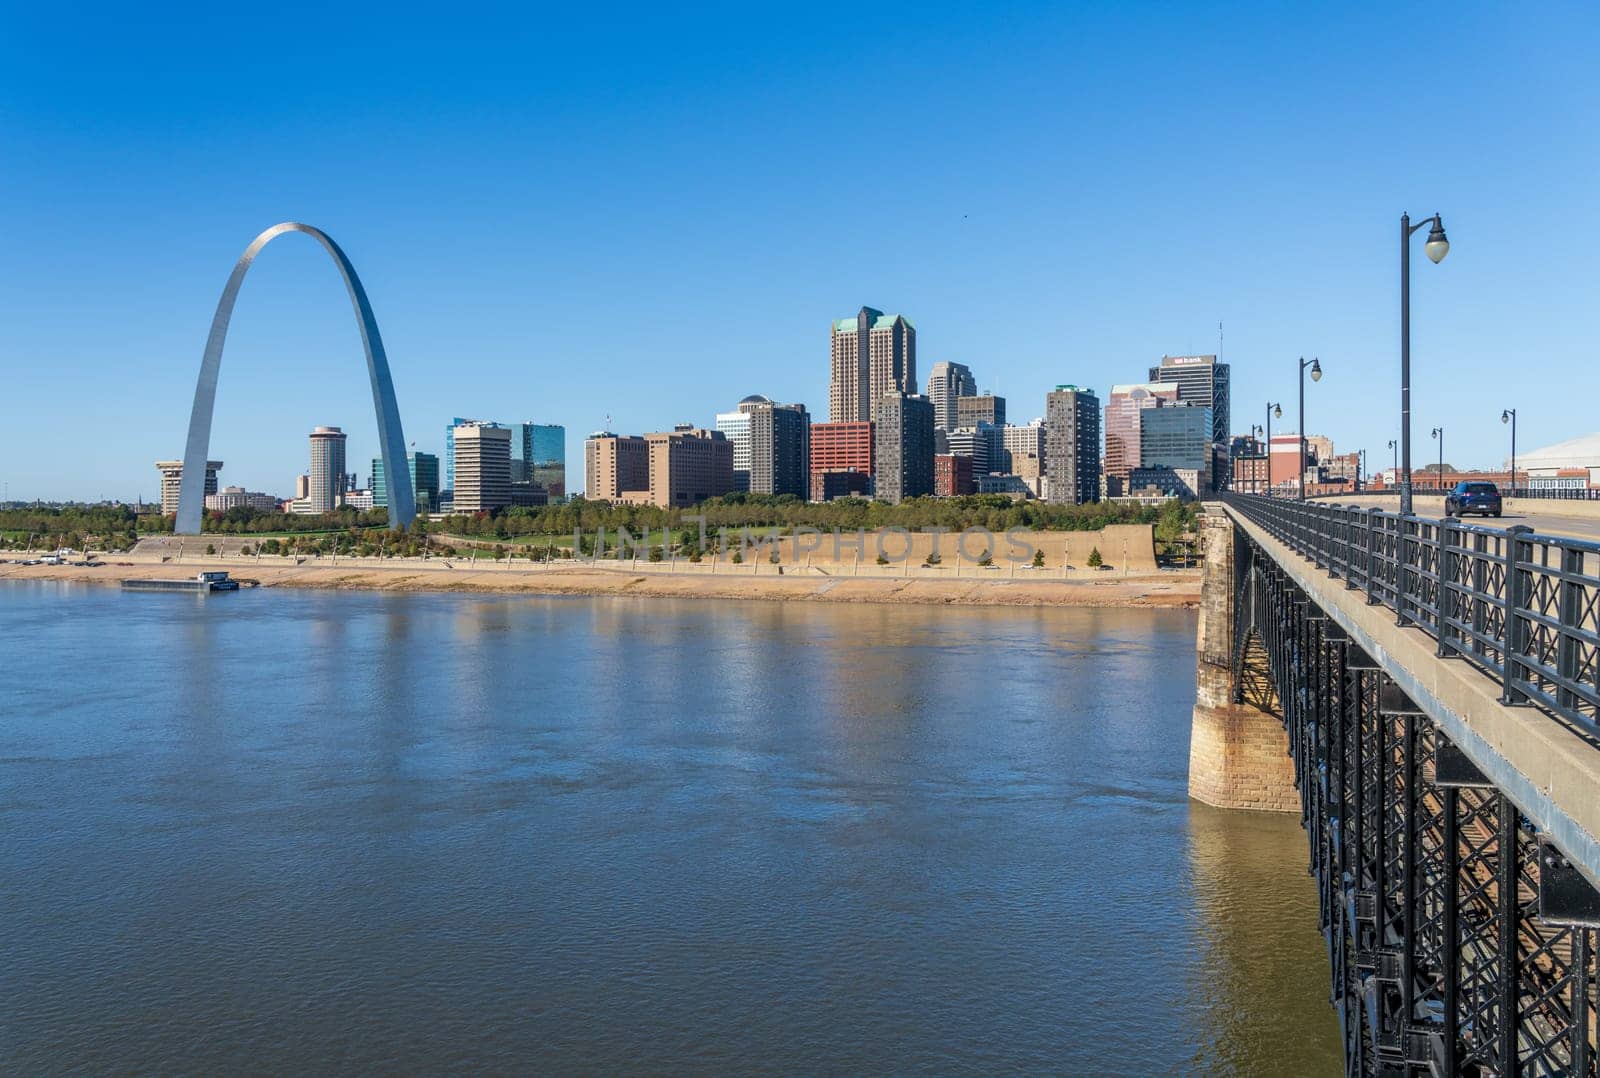 Unusual view of St Louis and Gateway Arch from Eads Bridge by steheap